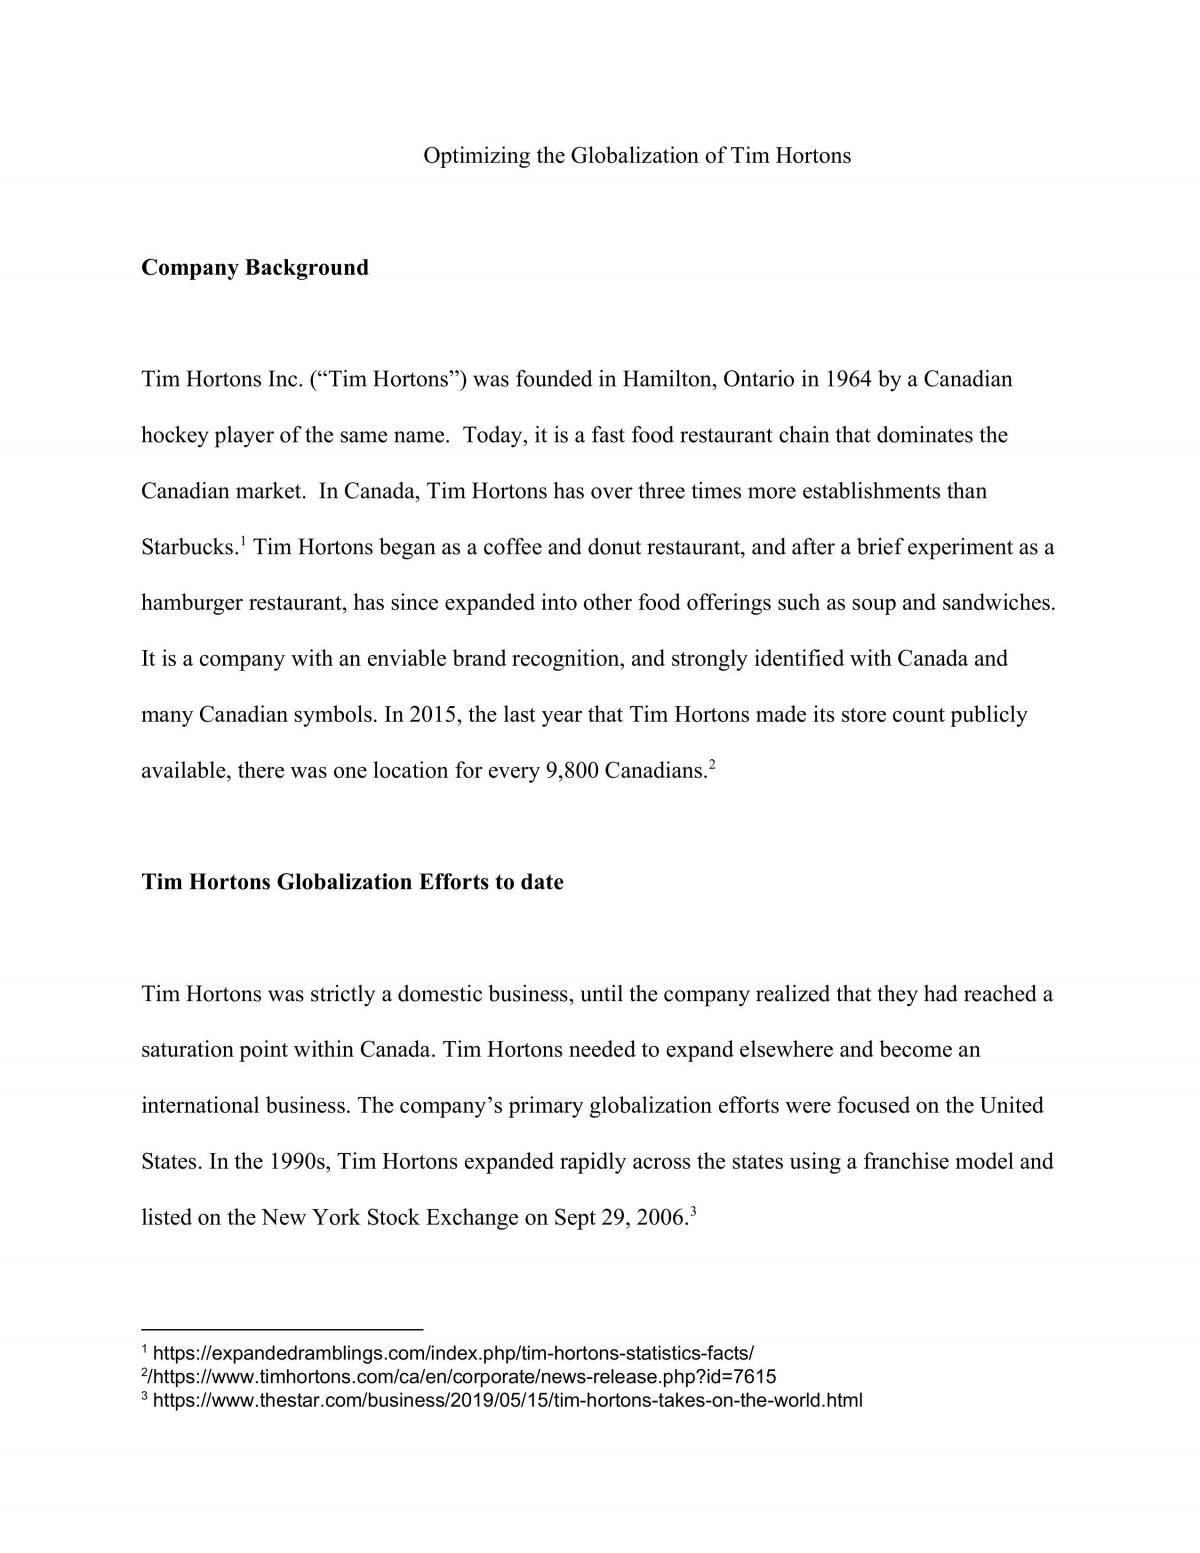 Essay on Tim Hortons Globalization - Page 1